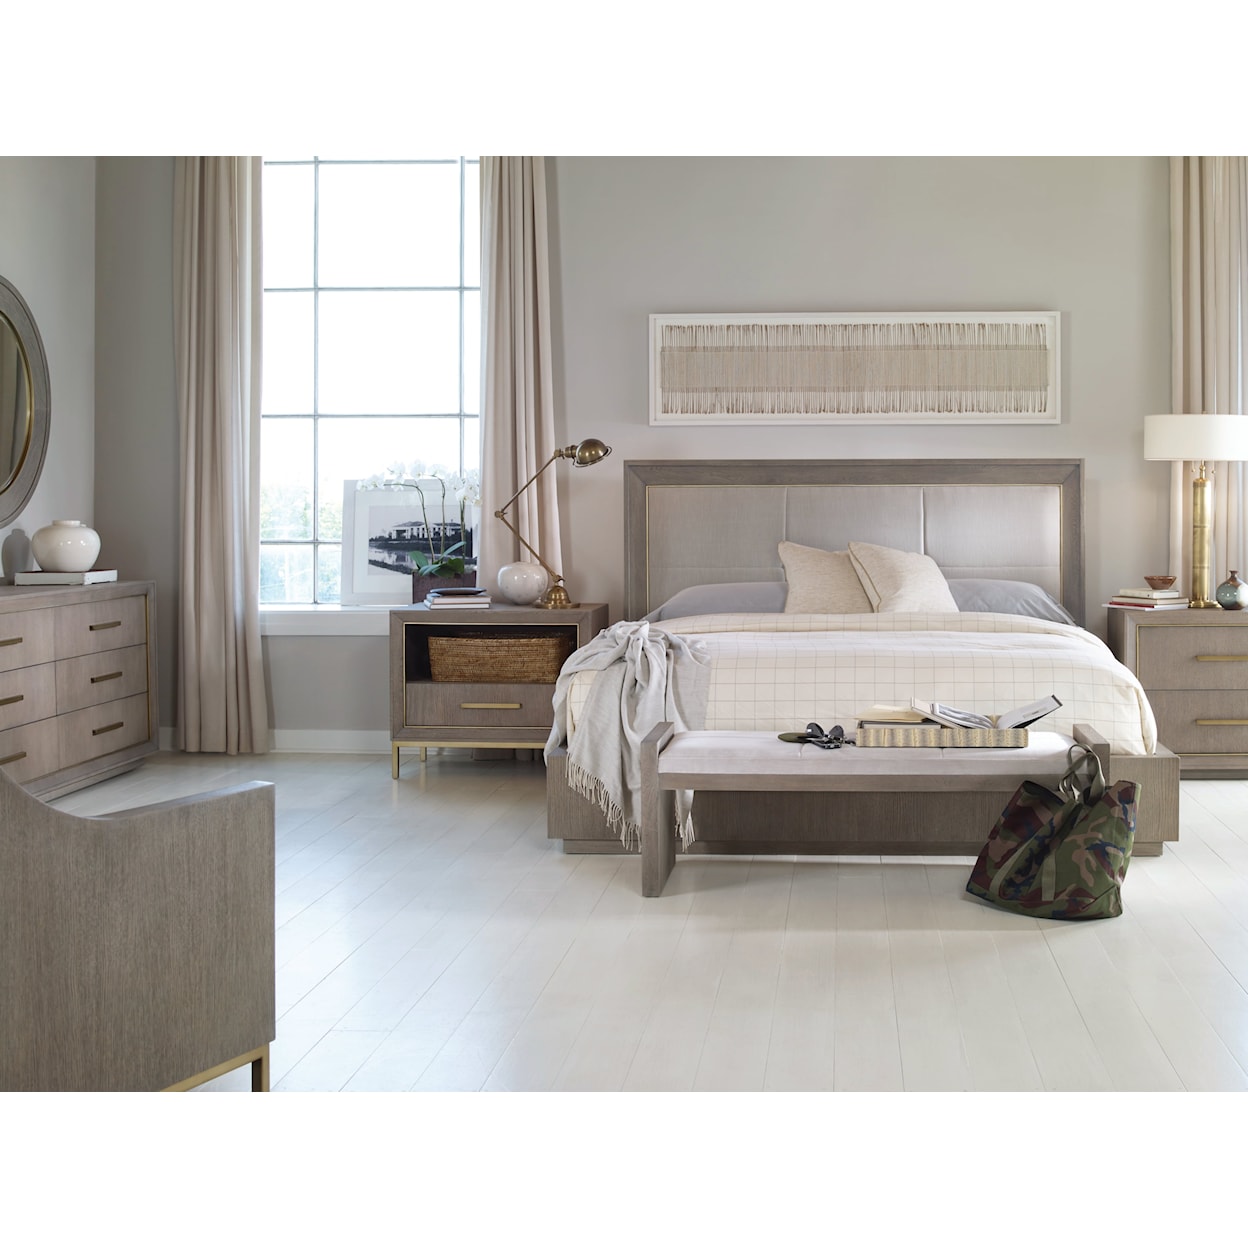 Century Archive Home and Monarch Kendall Bed King Size